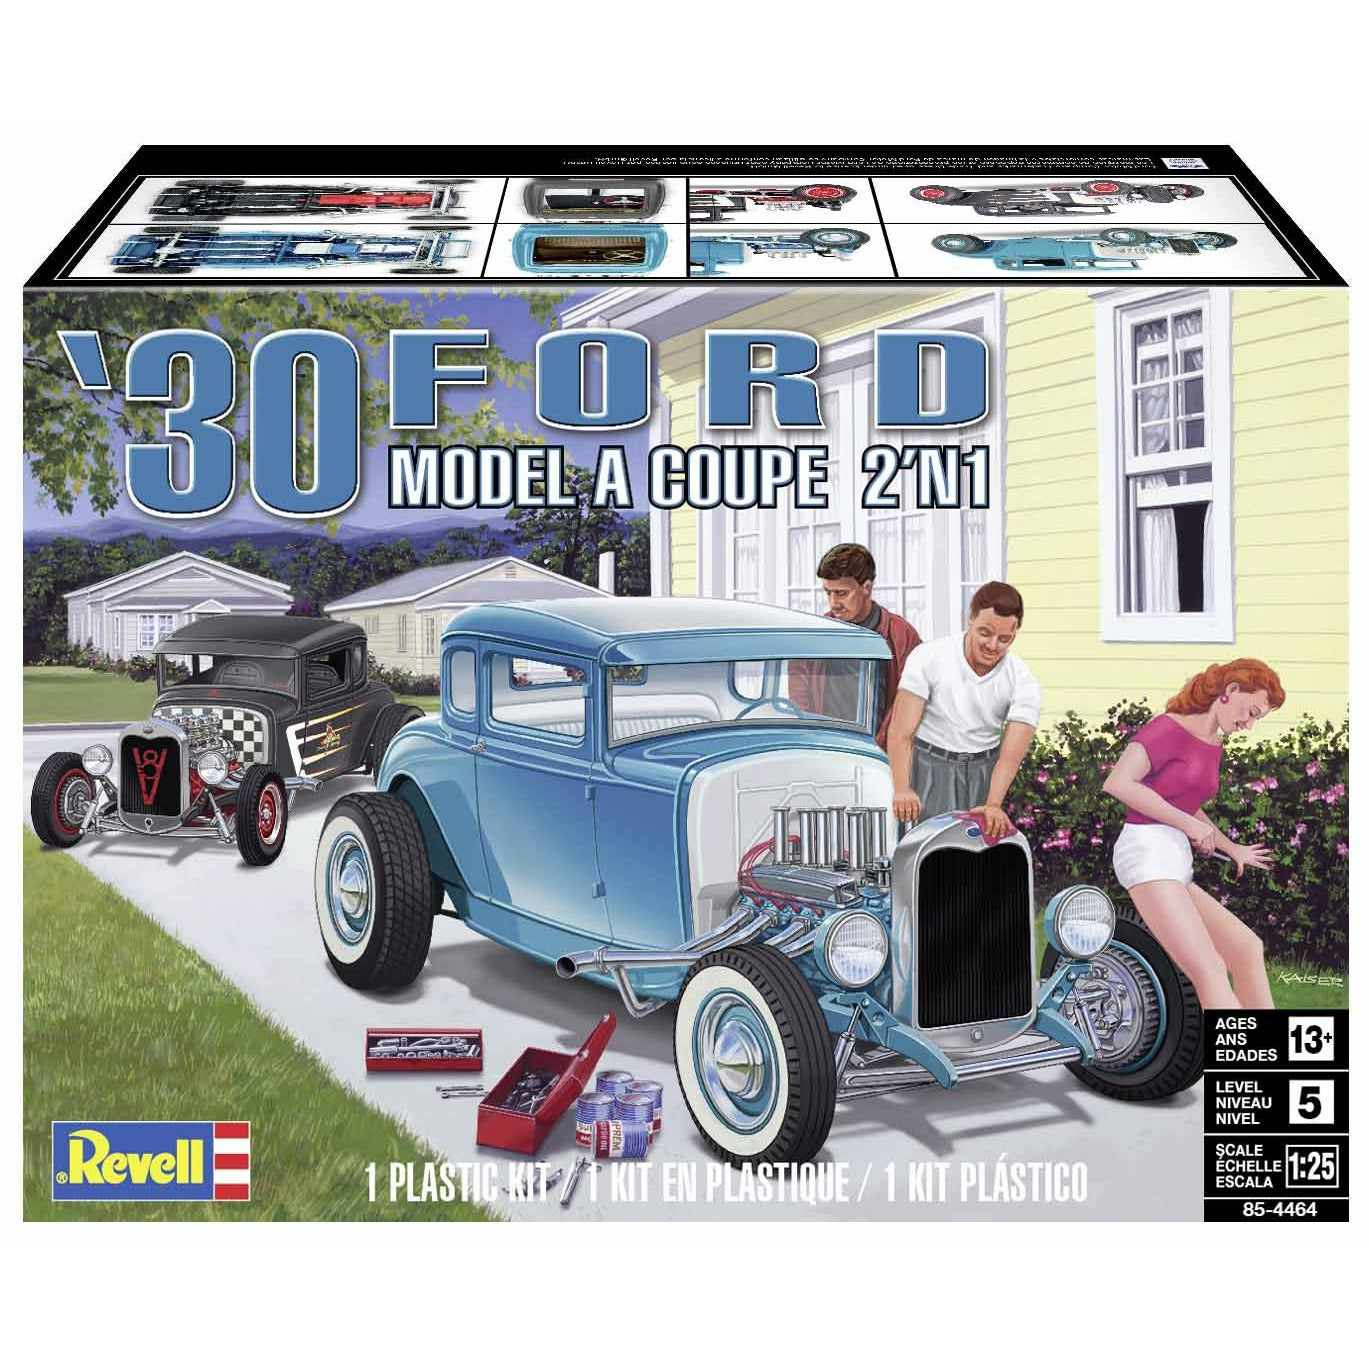 1930 Ford Model A Coupe 1/25 Model Car Kit #4464 by Revell